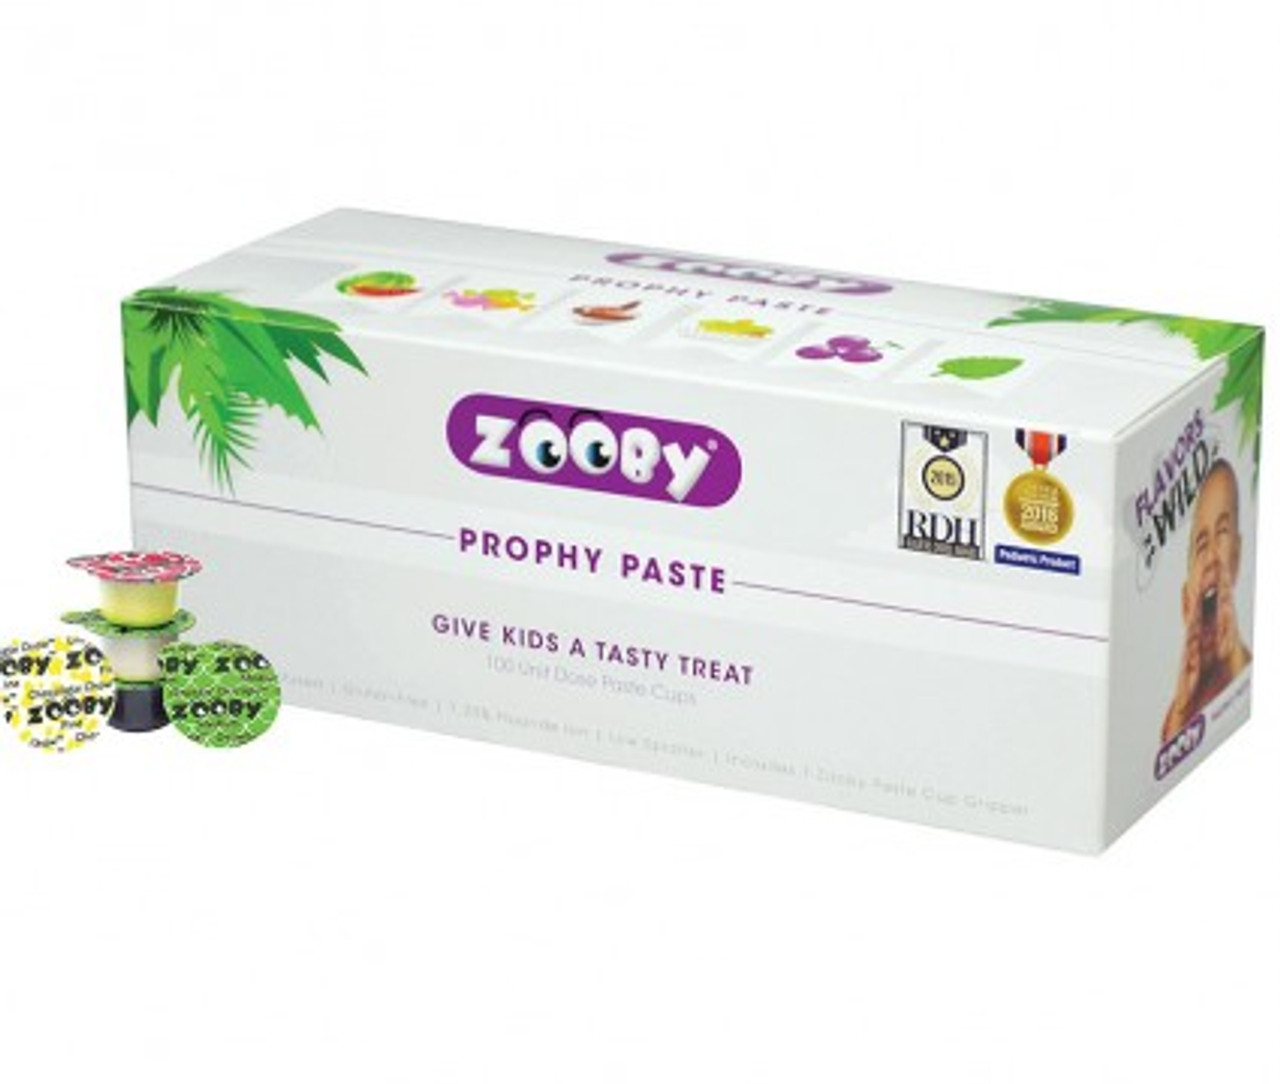 Zooby Prophy Paste Chocolate Chow Coarse 100/bx